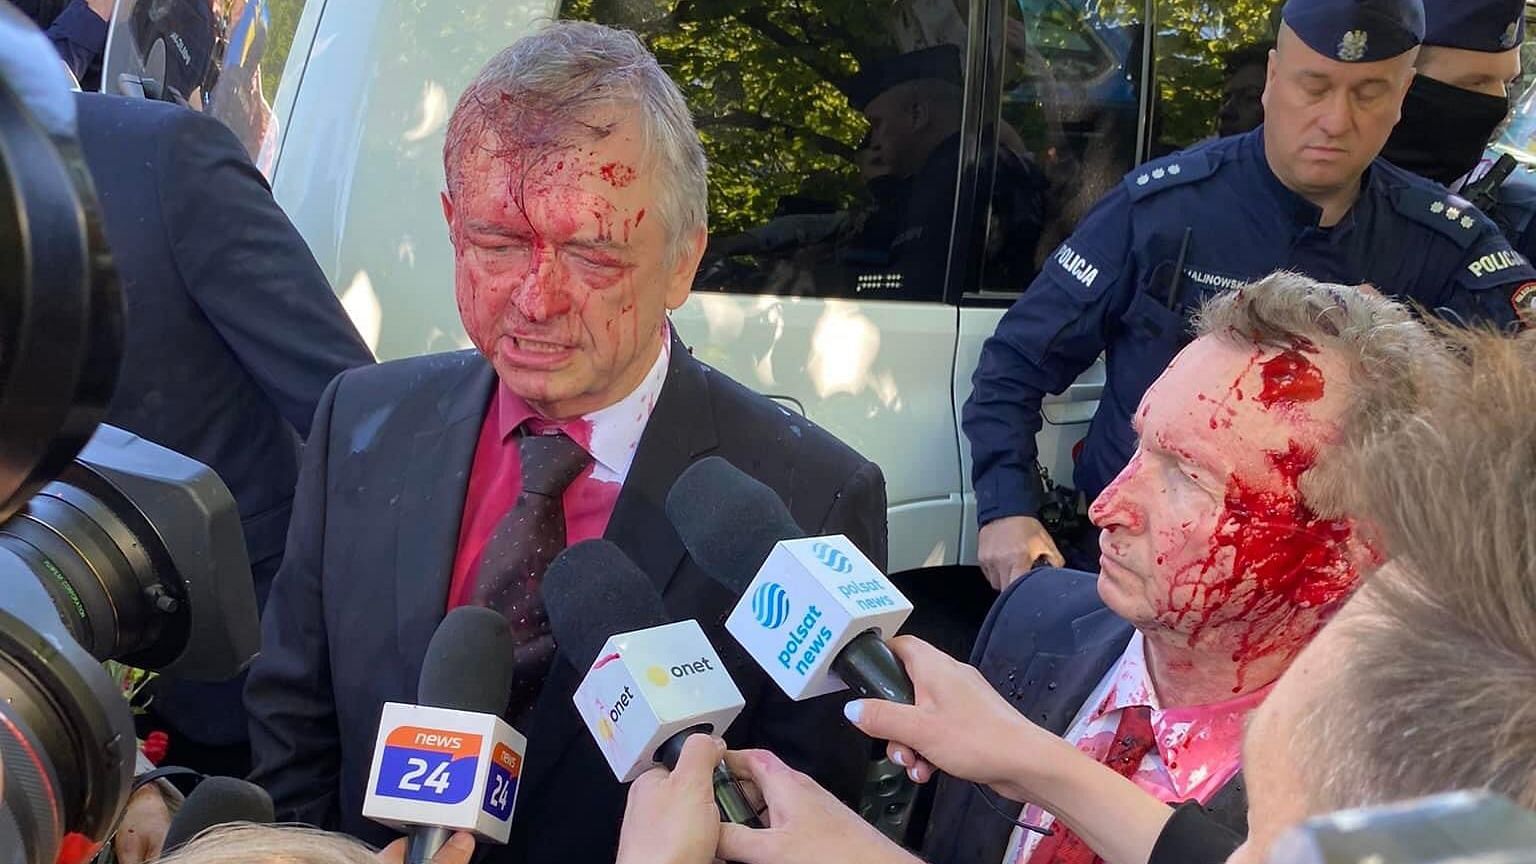 <div class="paragraphs"><p>The <a href="https://www.thequint.com/big-story/russia-ukraine-crisis">Russian ambassador</a> to Poland was attacked with red paint by pro-Ukraine activists in Warsaw on Monday, 9 May, during Russia's Victory Day celebrations that mark the Soviet defeat of Nazi Germany in World War II.</p></div>